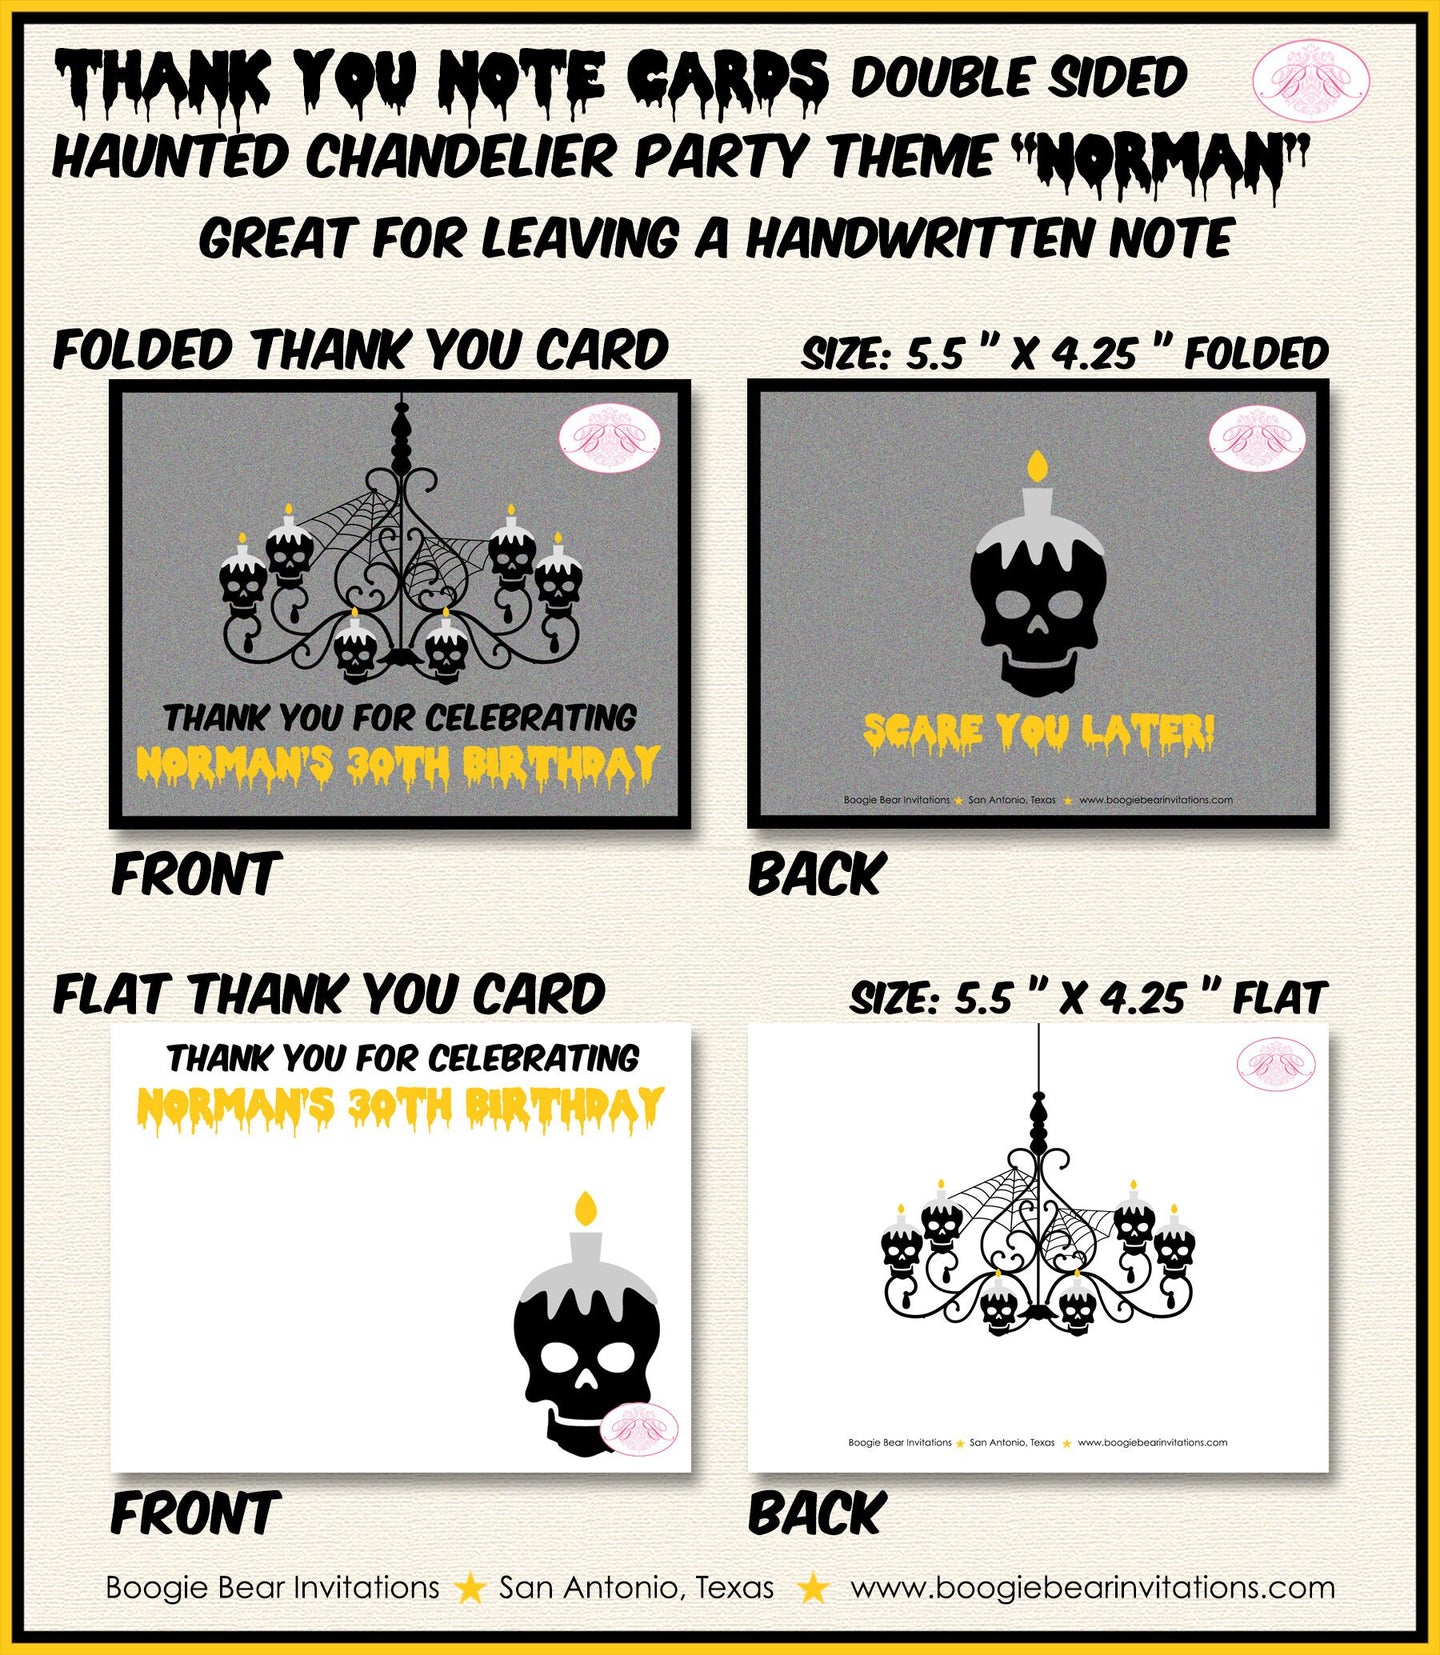 Haunted House Party Thank You Card Note Birthday Halloween Chandelier Black Skull Boy Mens Girl Boogie Bear Invitations Norman Theme Printed